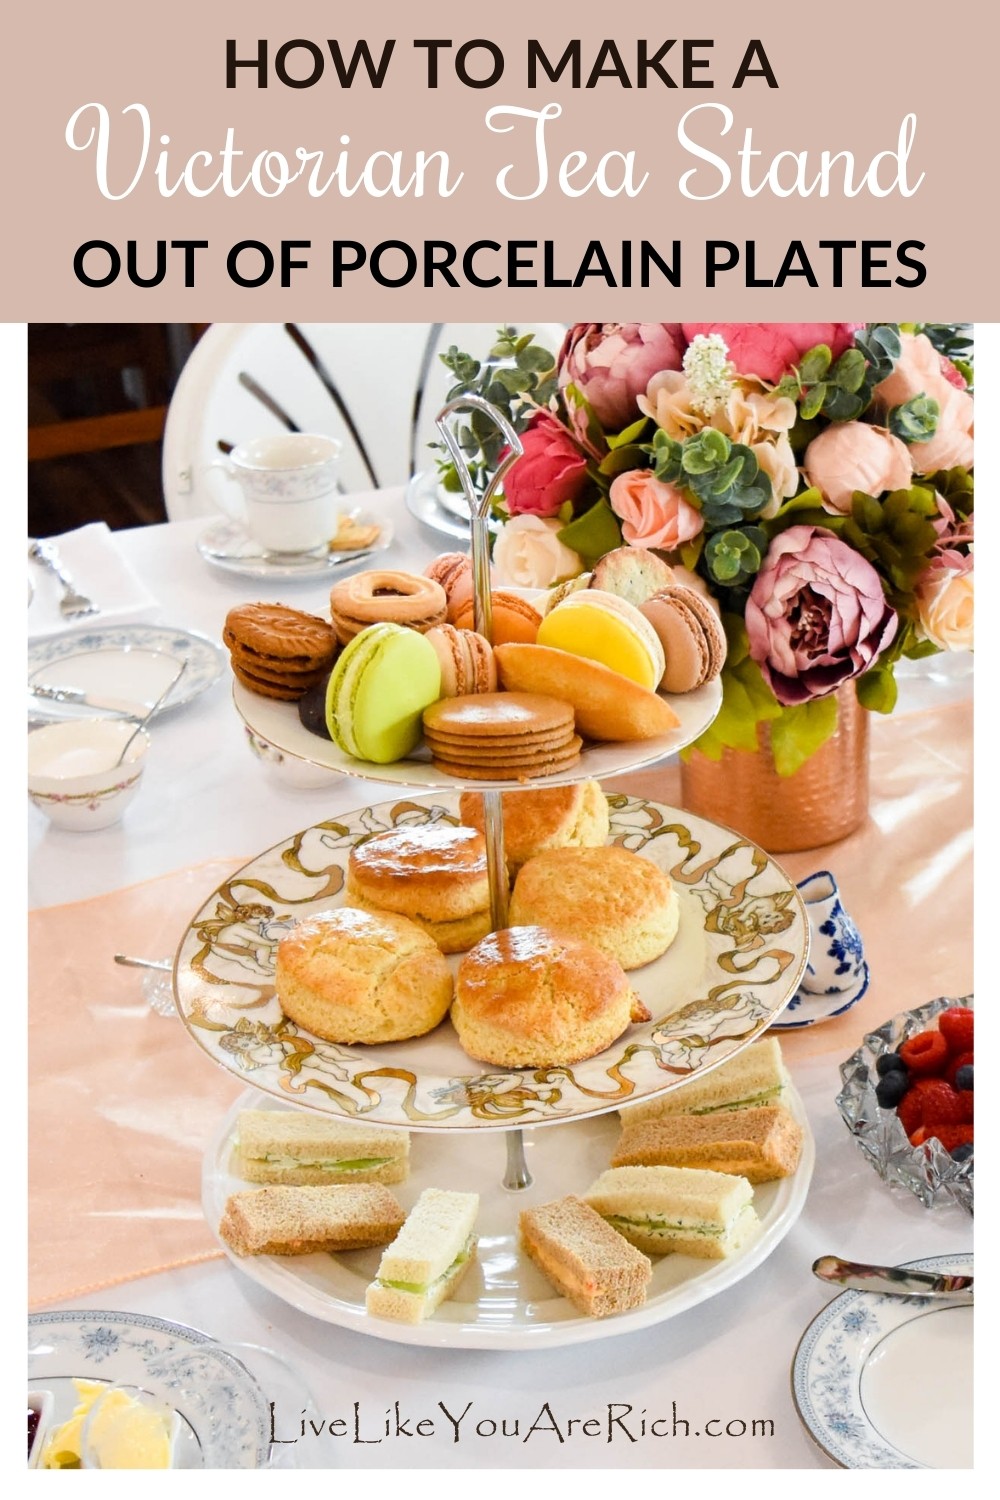 This steps will demonstrate how to make a victorian tea stand out of porcelain plates. I threw an Authentic Victorian Tea Party baby shower for my awesome sister-in-law. In order to serve food in this traditional manner, I made three of these 3-tiered Victorian Tea Stands. They turned out beautiful and were very sturdy.